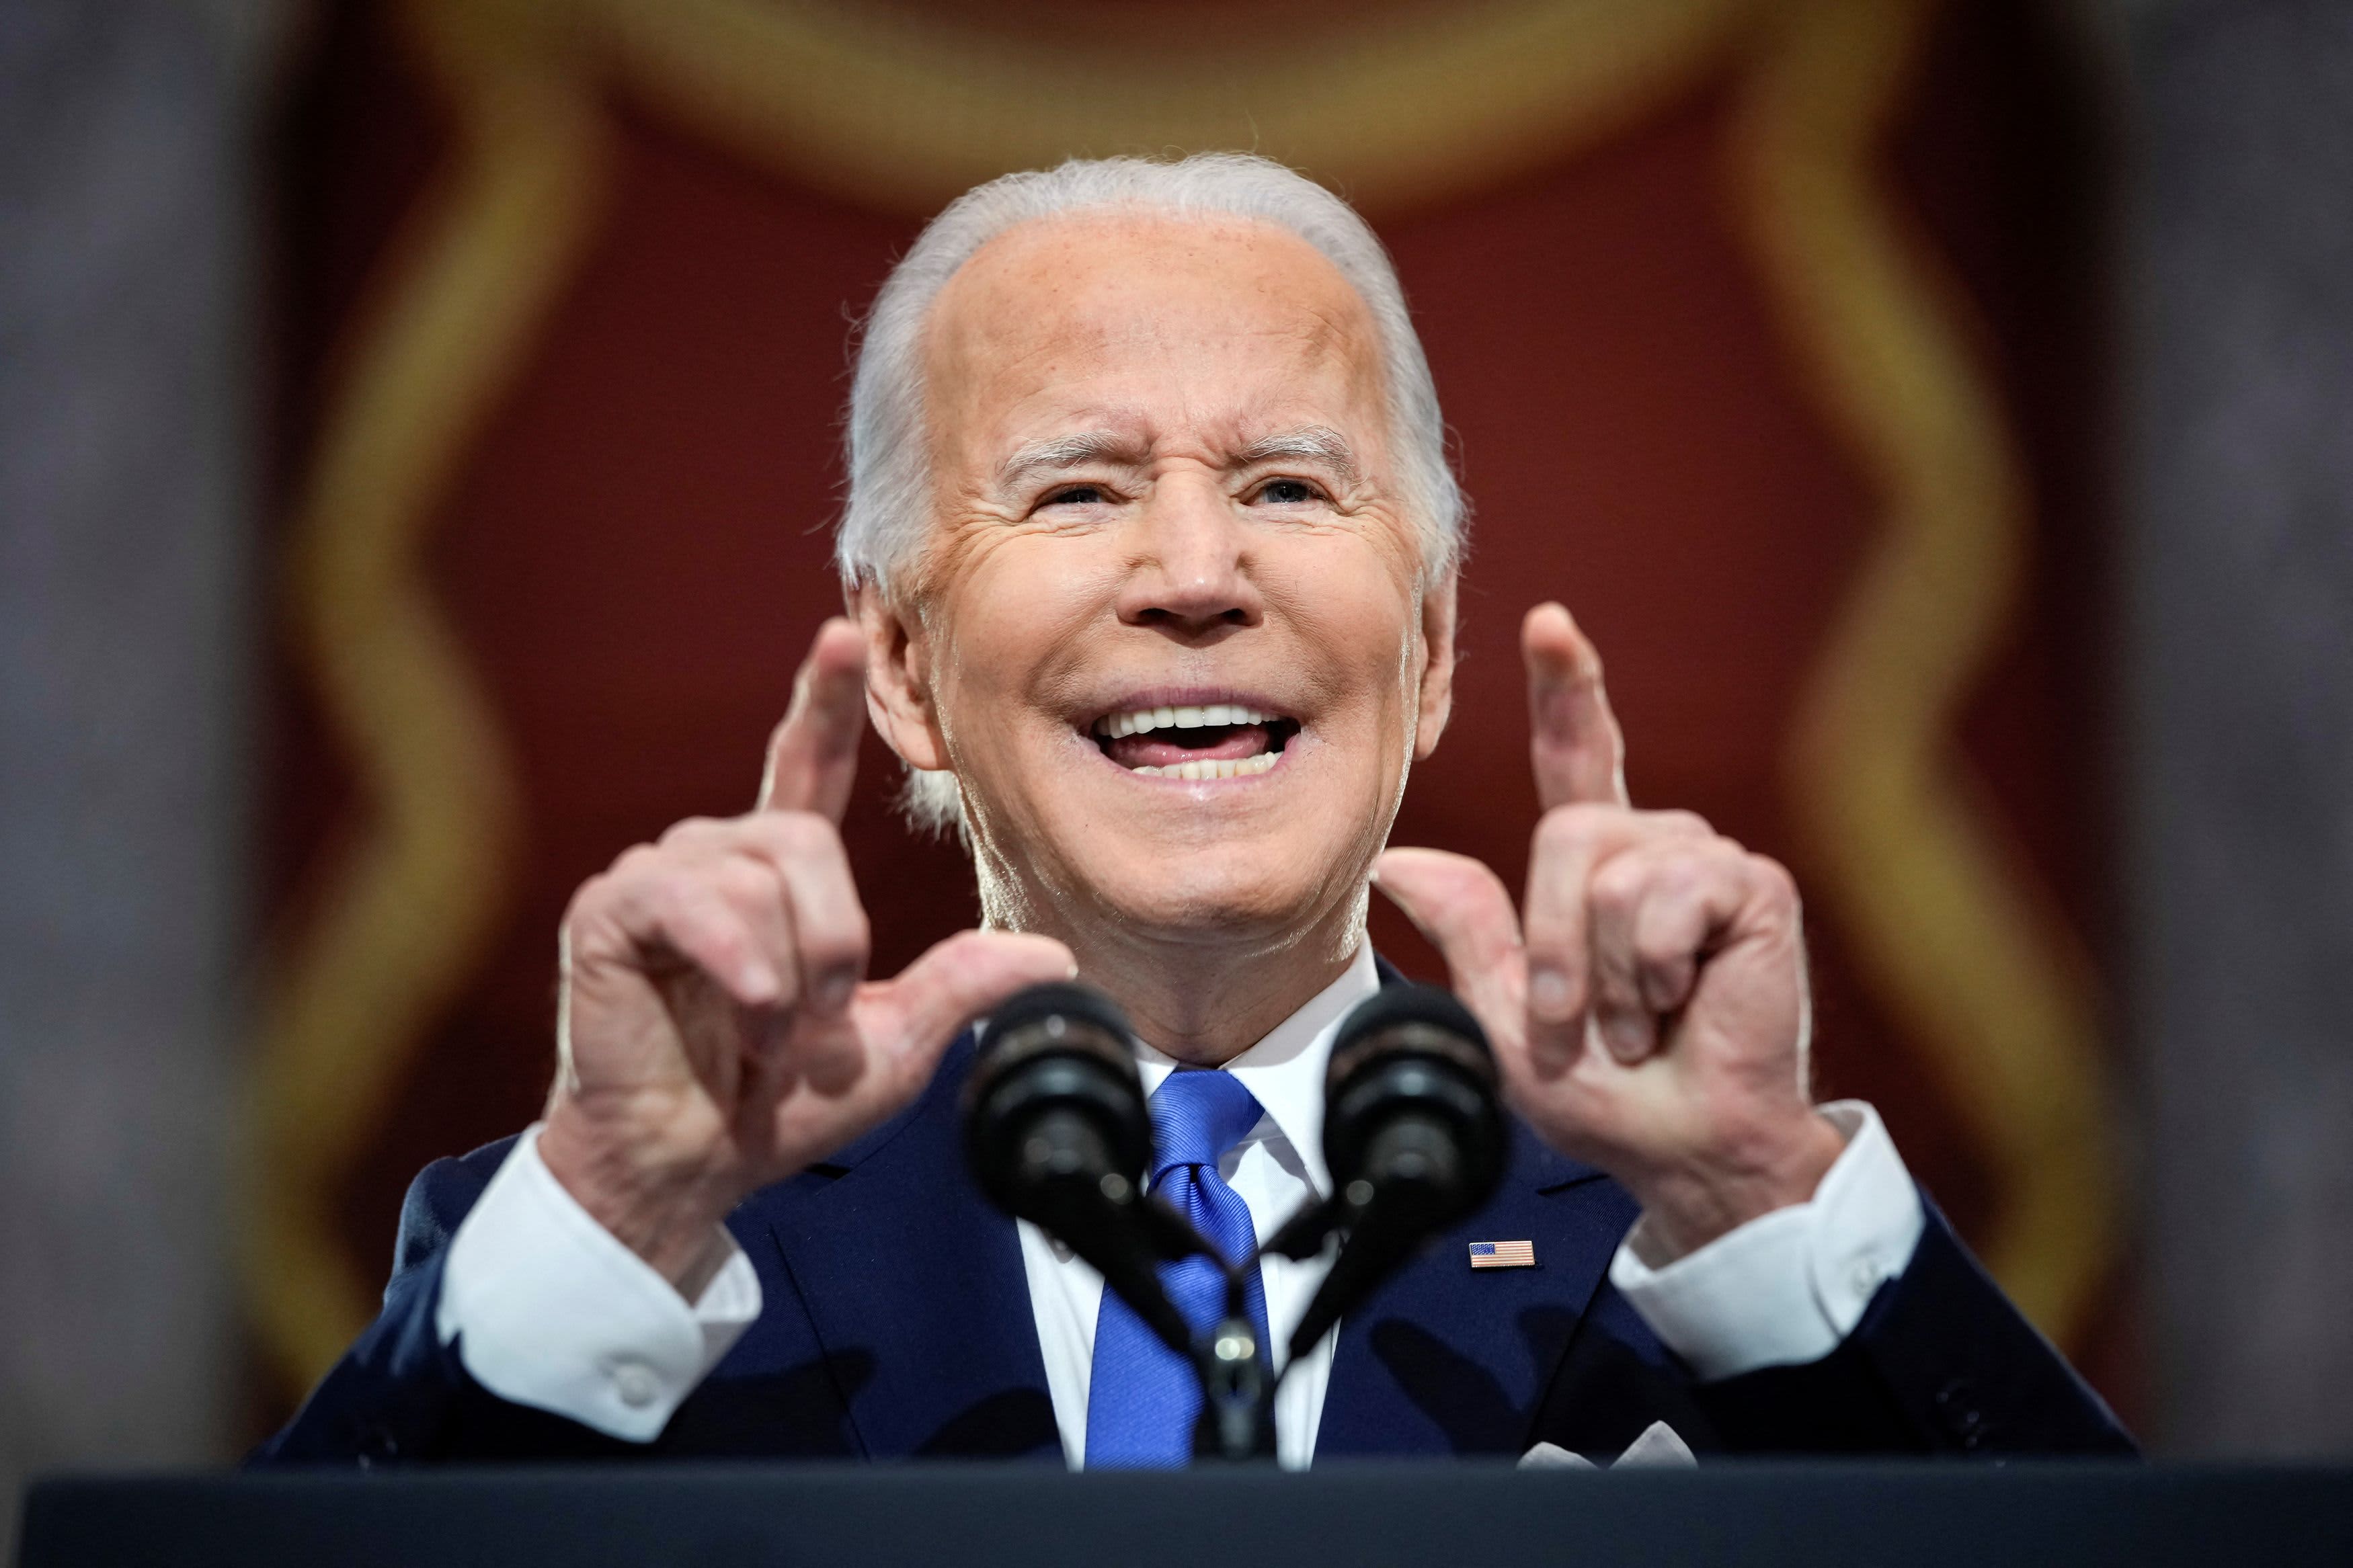 Messy job reports and unreliable labor data forecasts take a toll on Biden in his first year